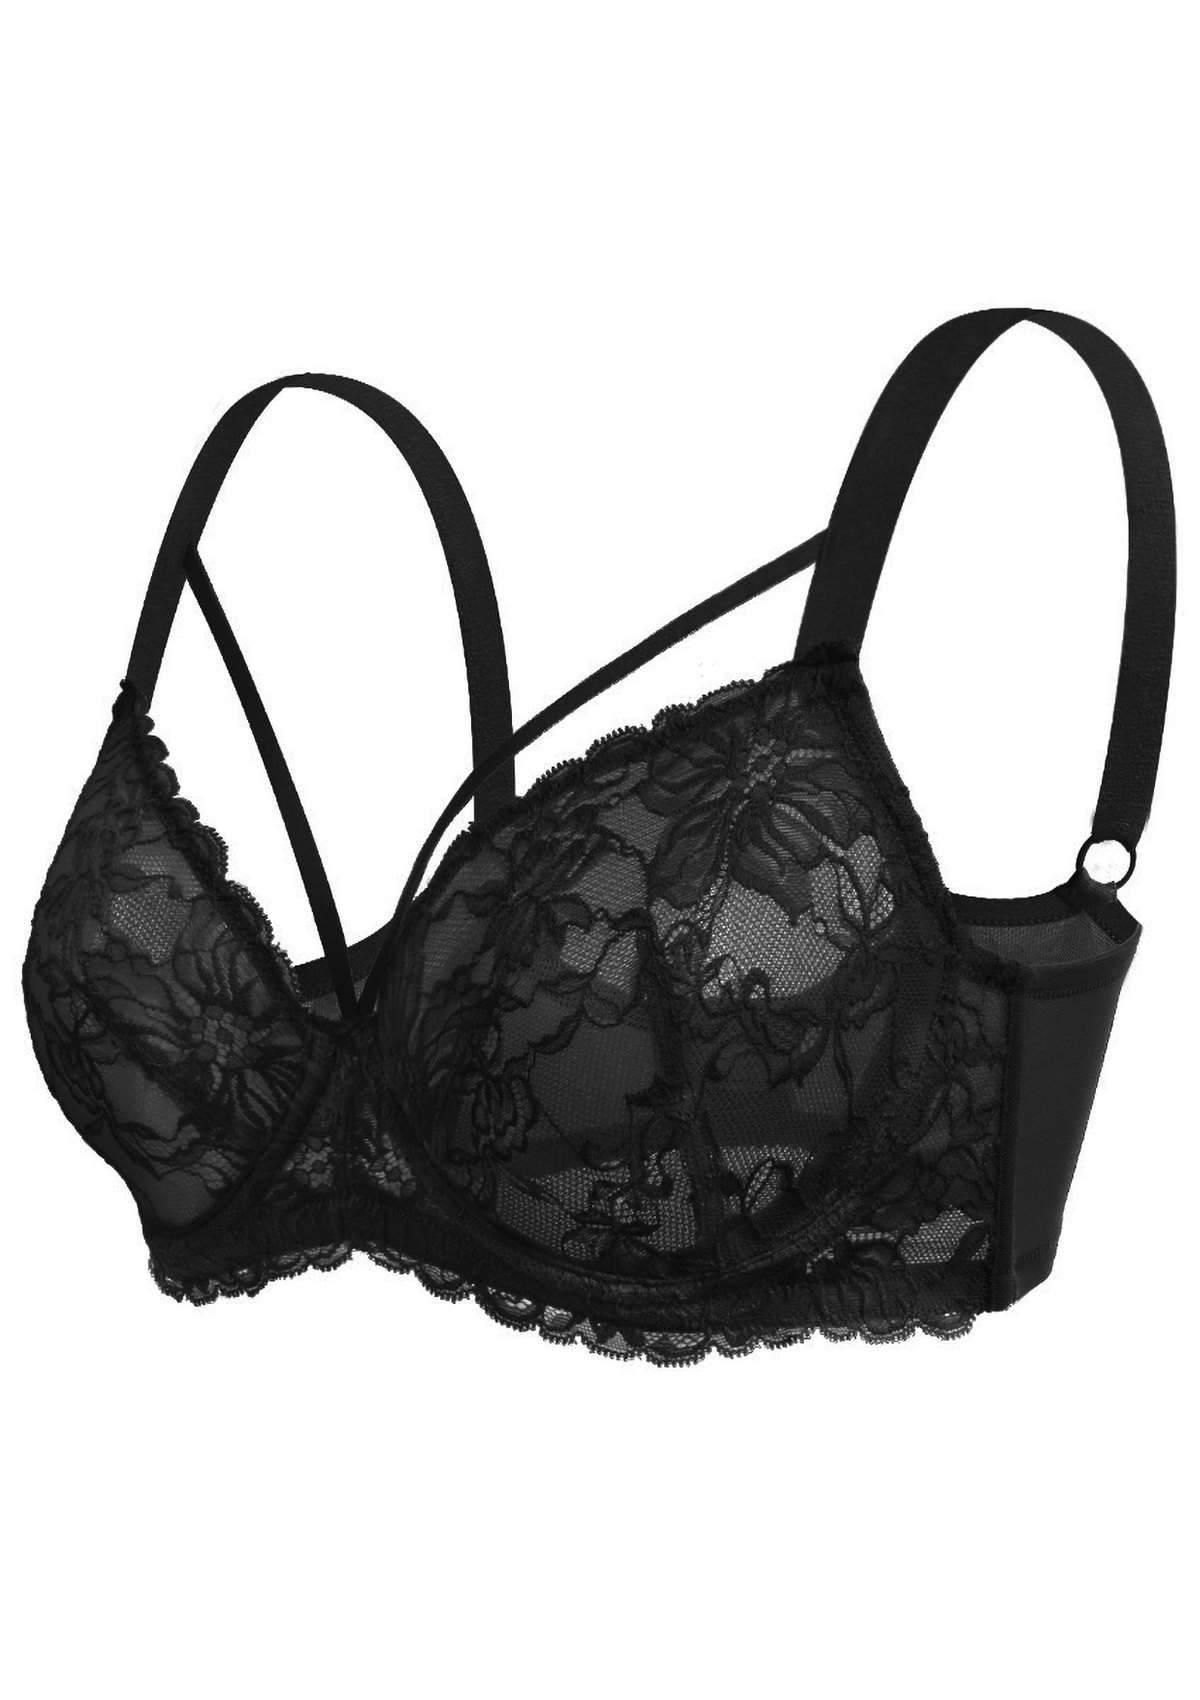 HSIA Pretty In Petals Bra - Plus Size Lingerie For Comfrot And Support - Black / 40 / D